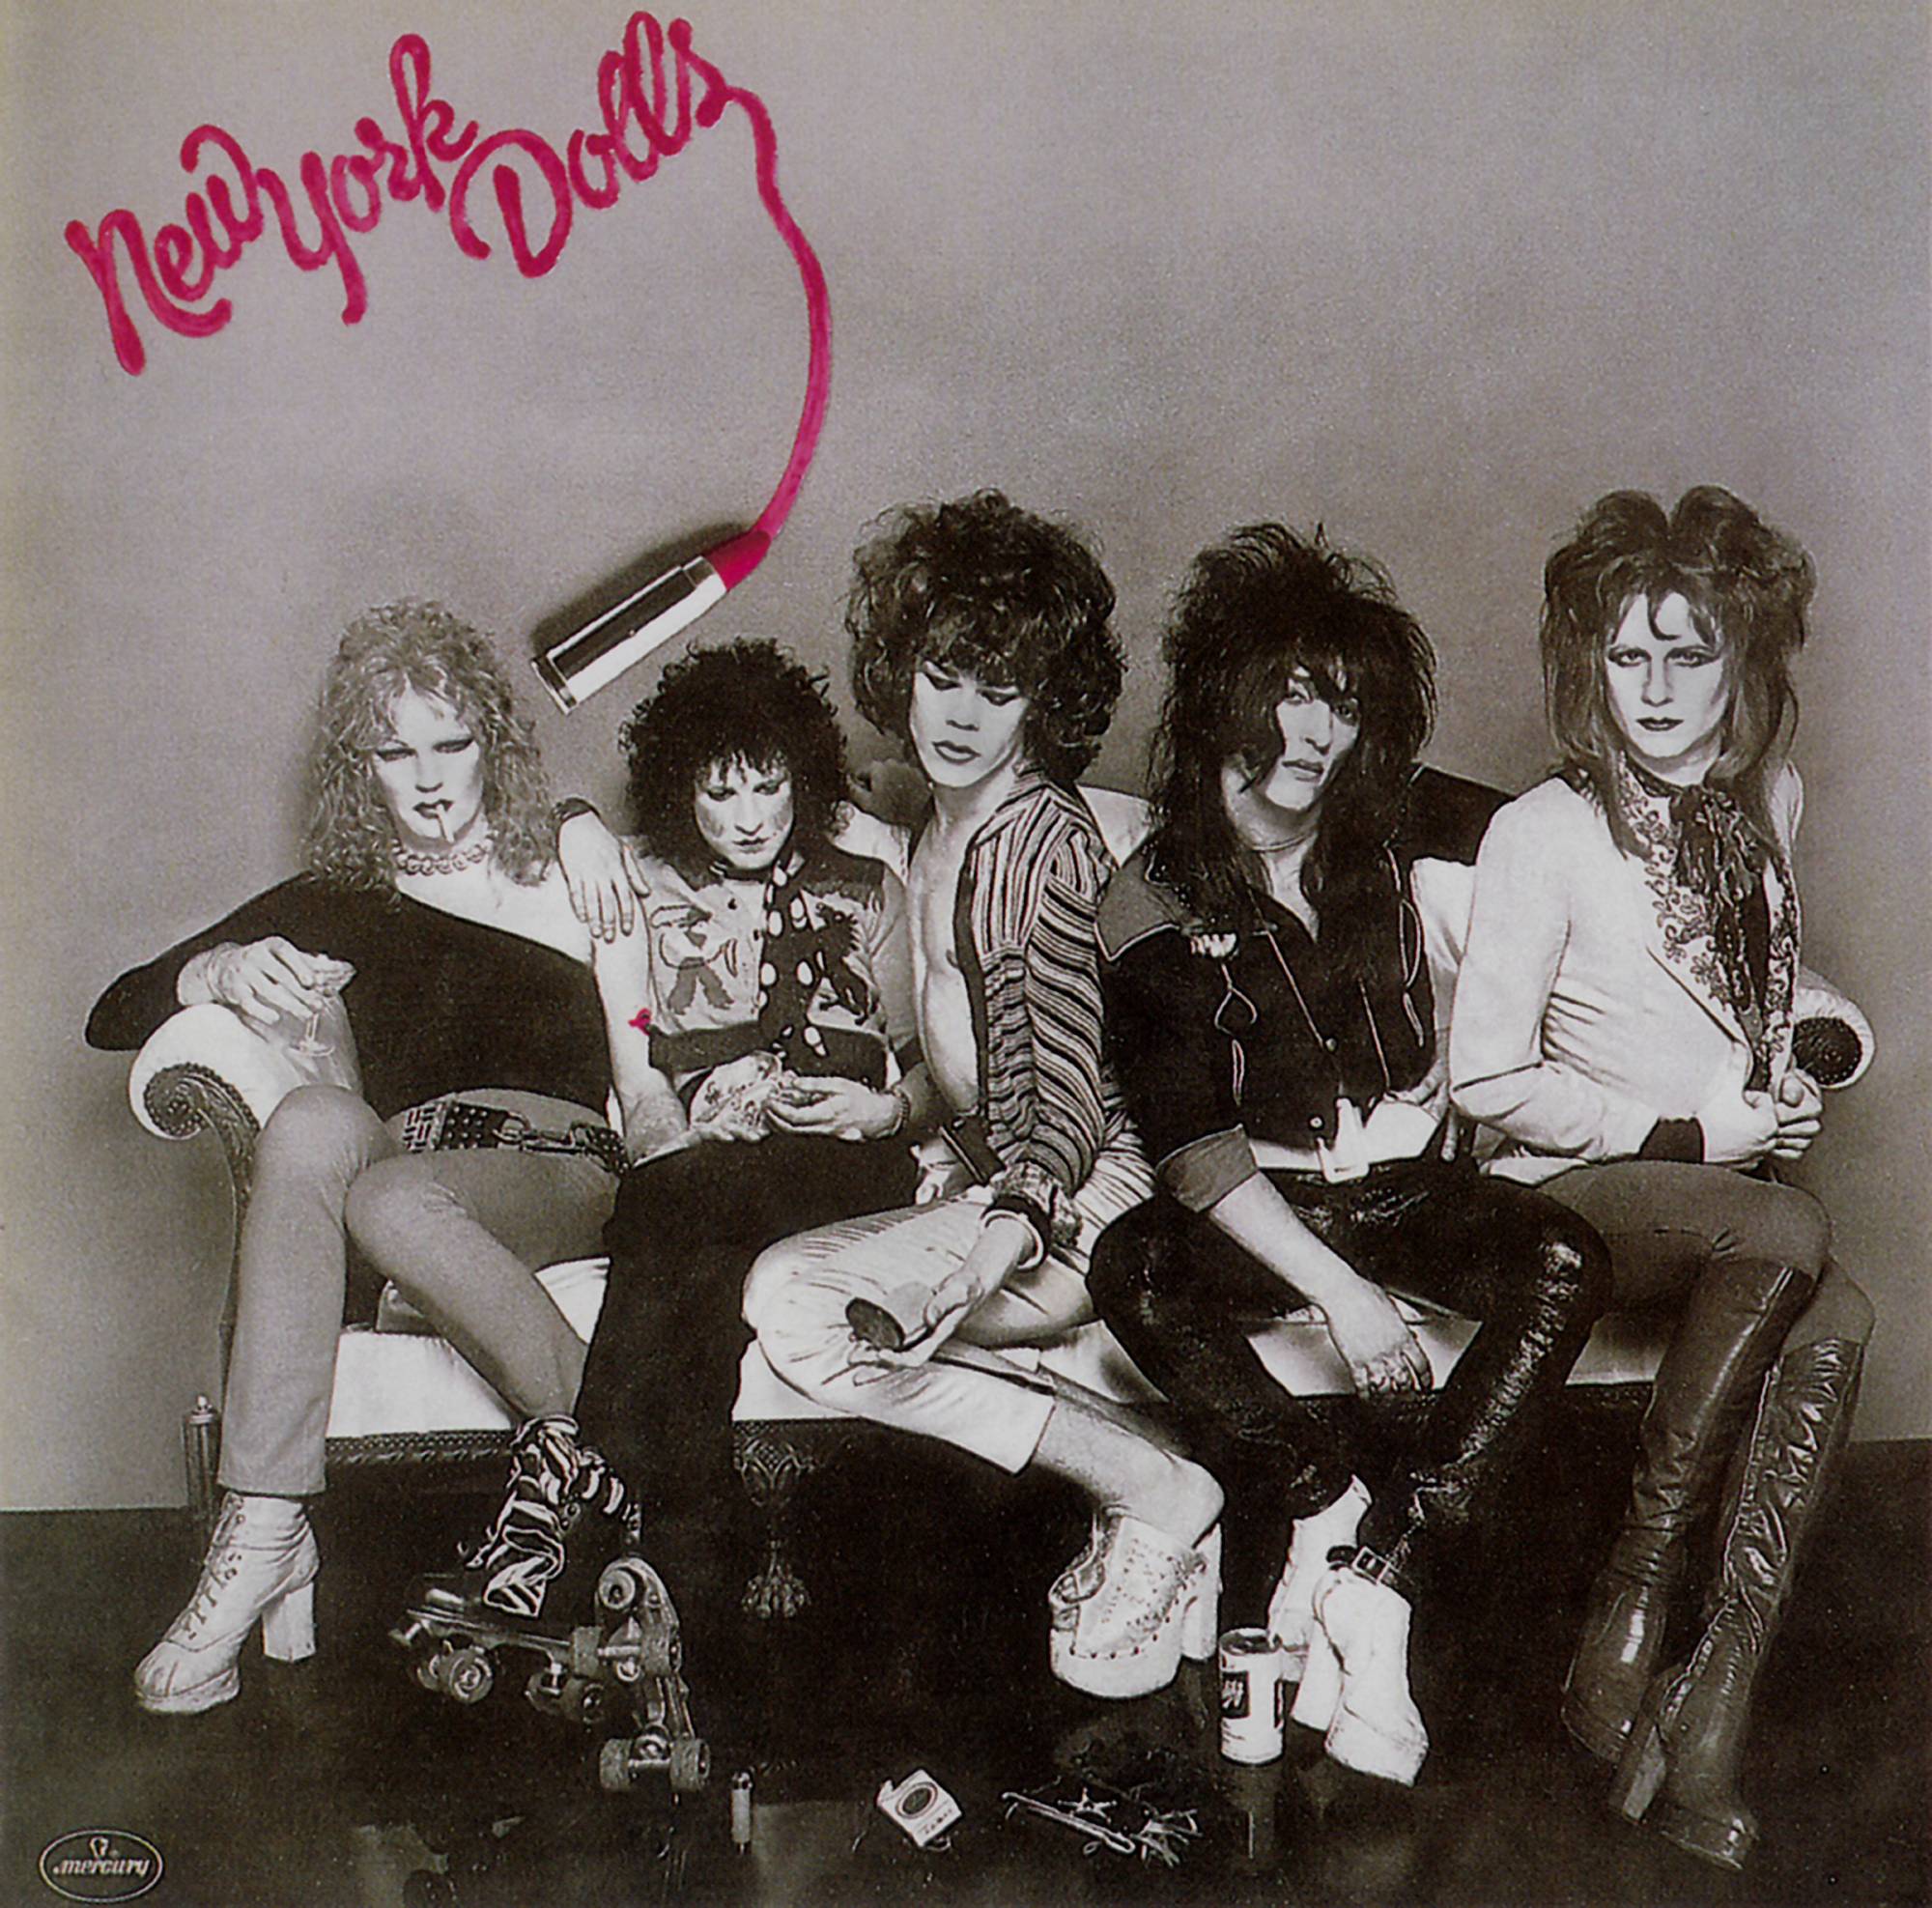  The album cover for the New York Dolls eponymous debut album released by Mercury Records. (Photo by Toshi Matsuo/Mercury Records/Getty Images)